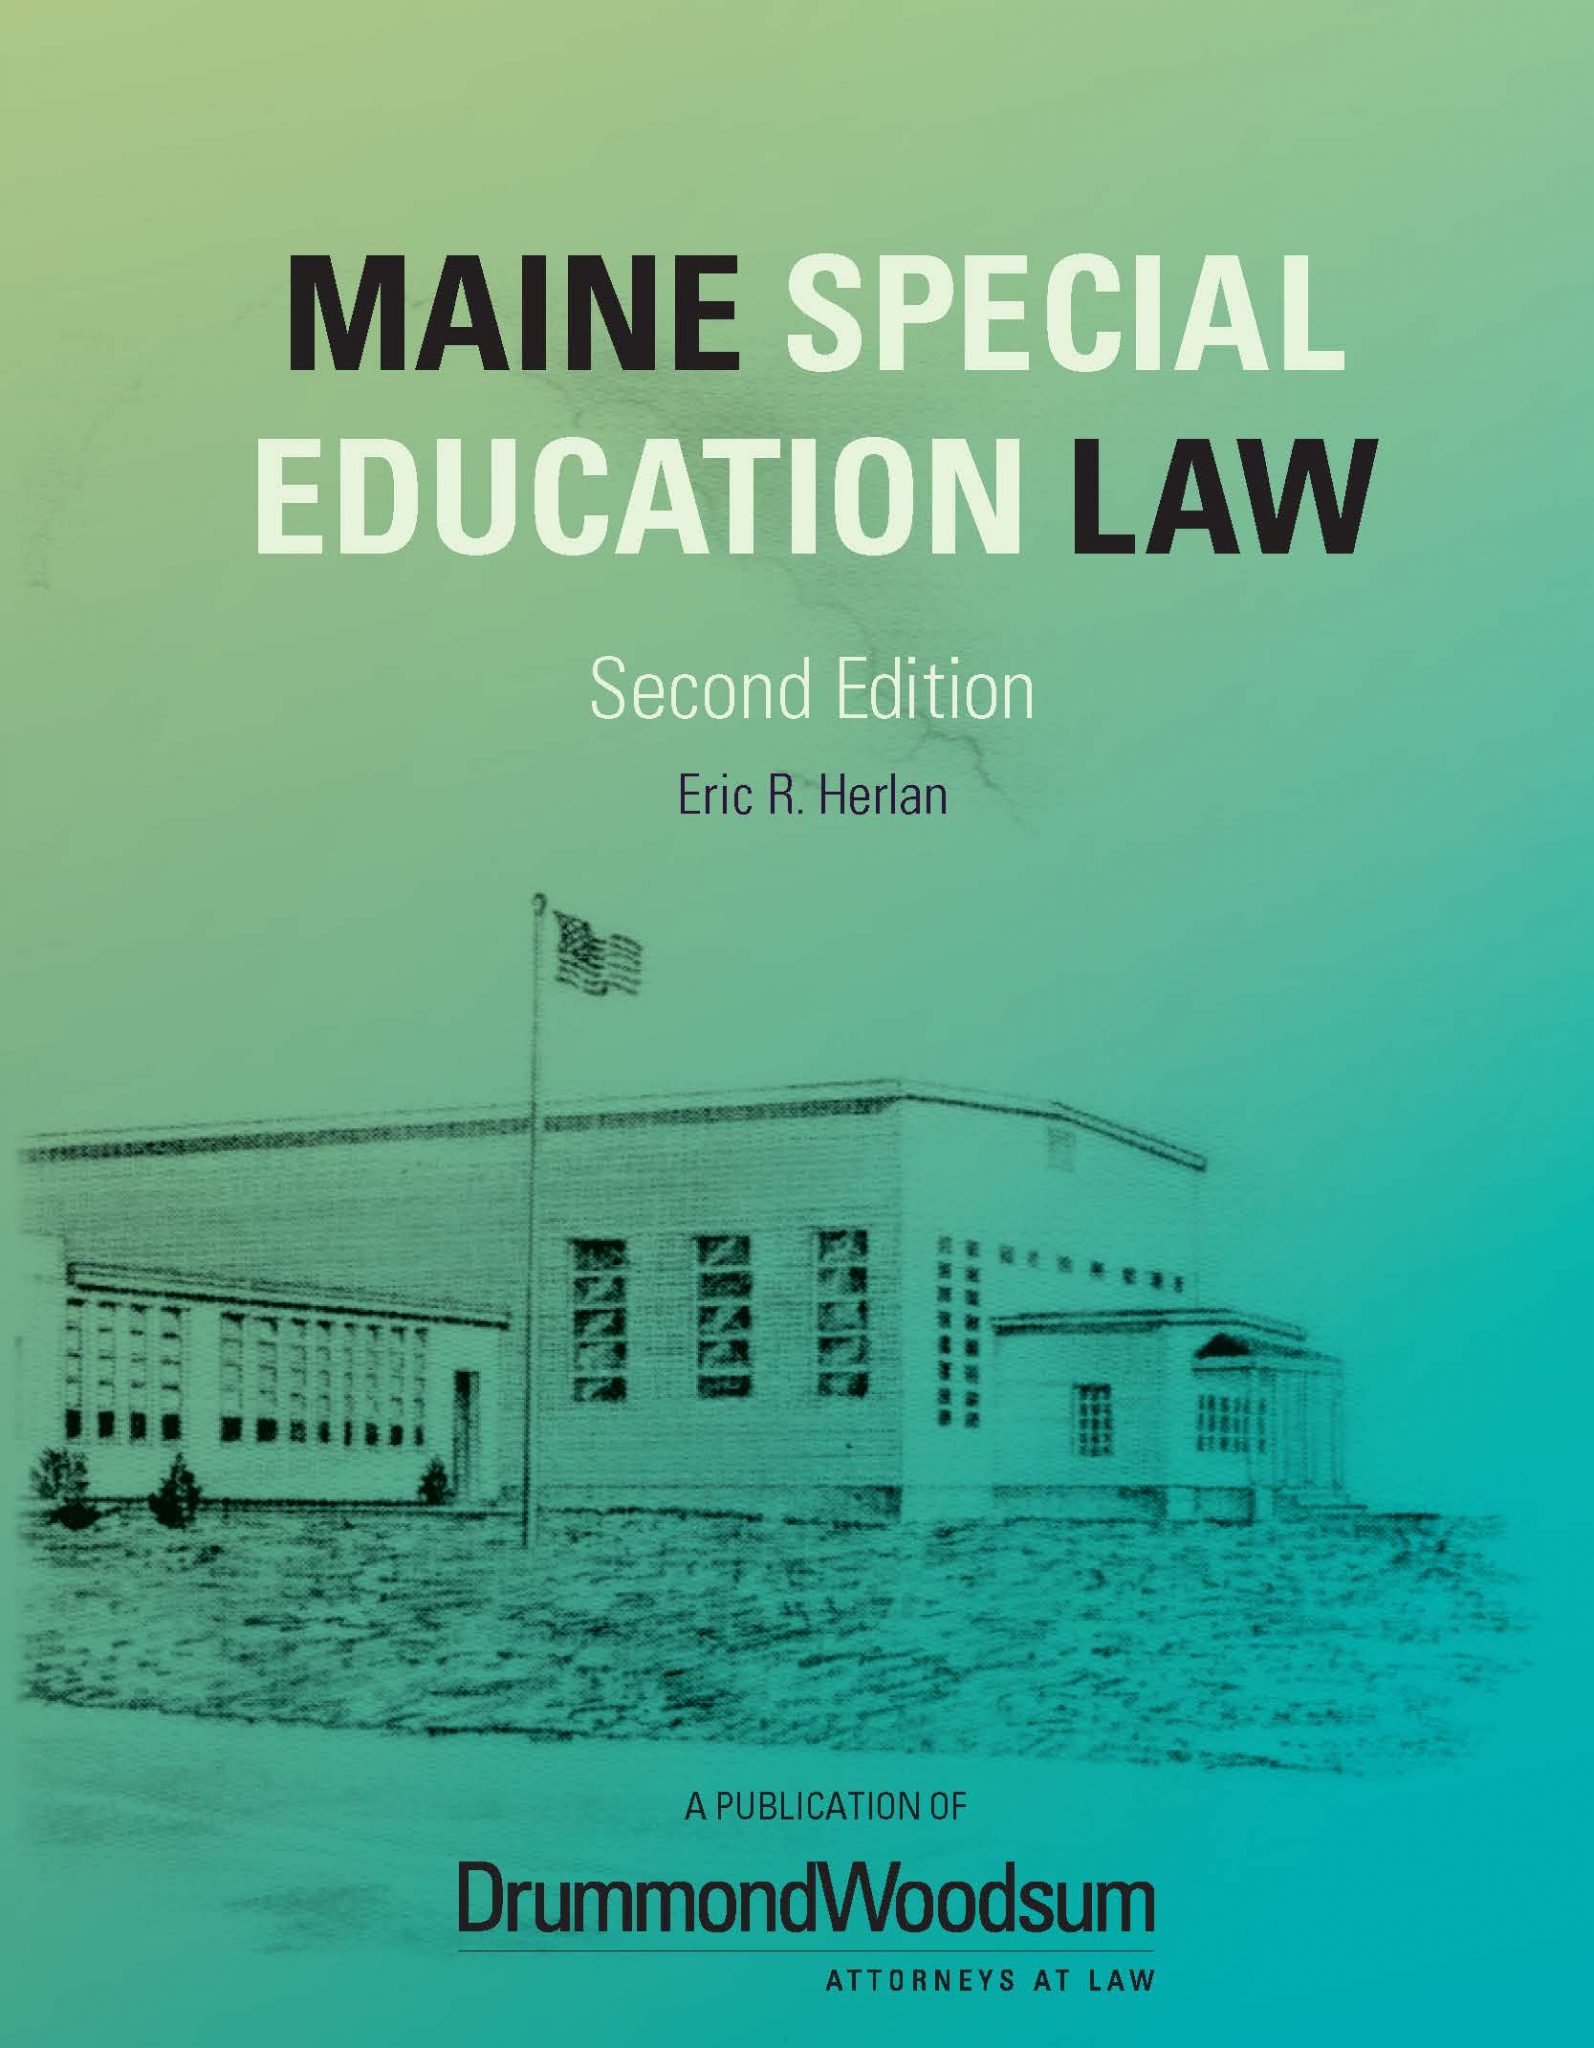 Maine Special Education Law, Second Edition, 2020 Drummond Woodsum